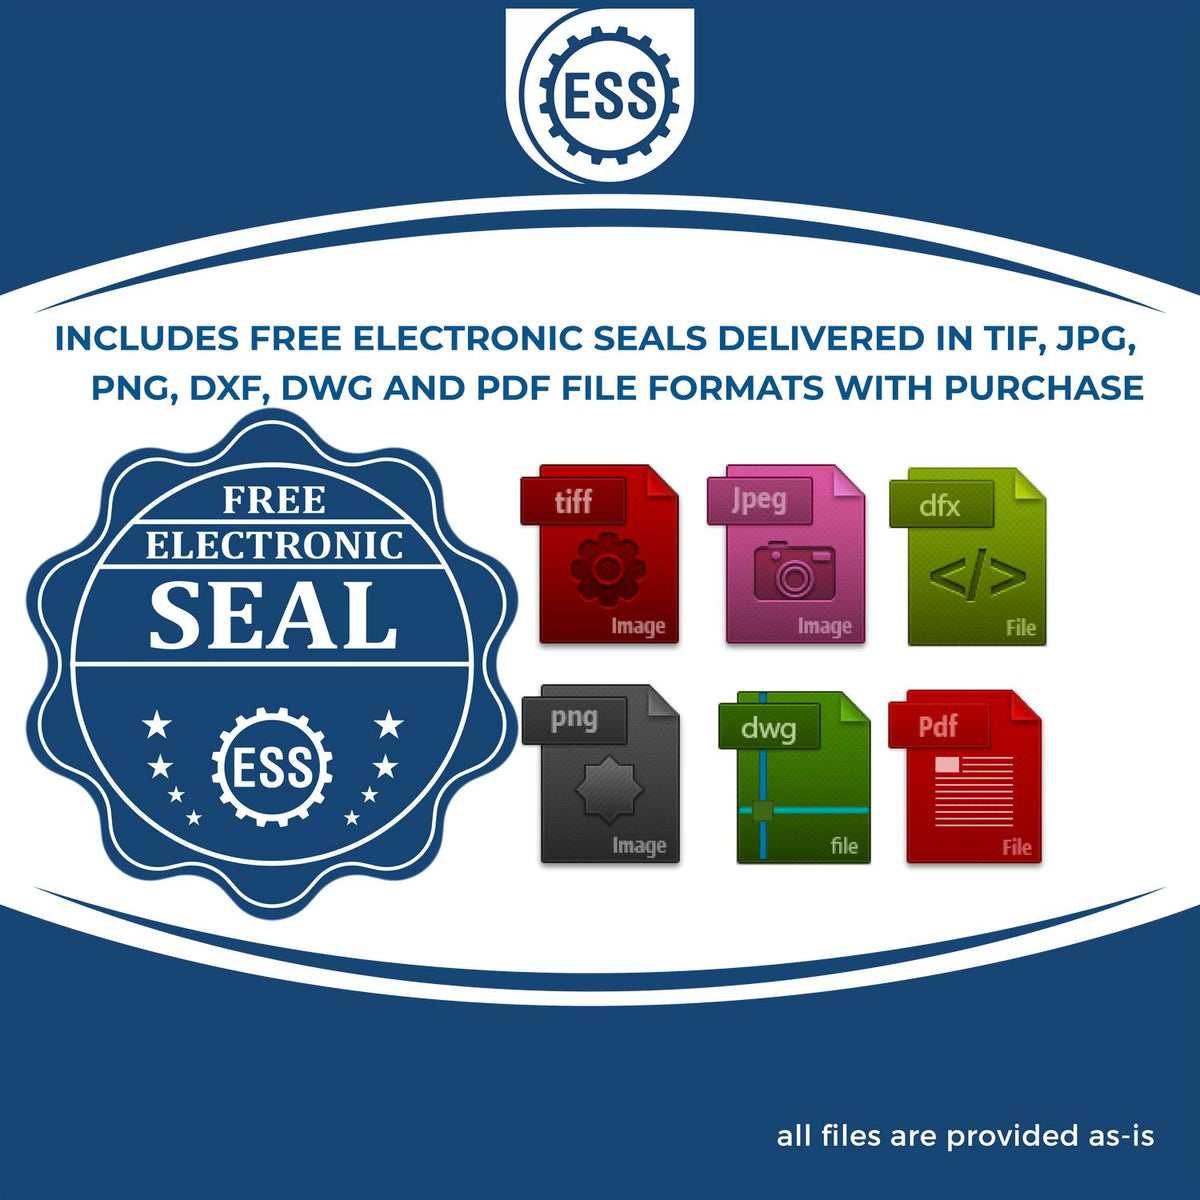 An infographic for the free electronic seal for the Gift Alaska Geologist Seal illustrating the different file type icons such as DXF, DWG, TIF, JPG and PNG.